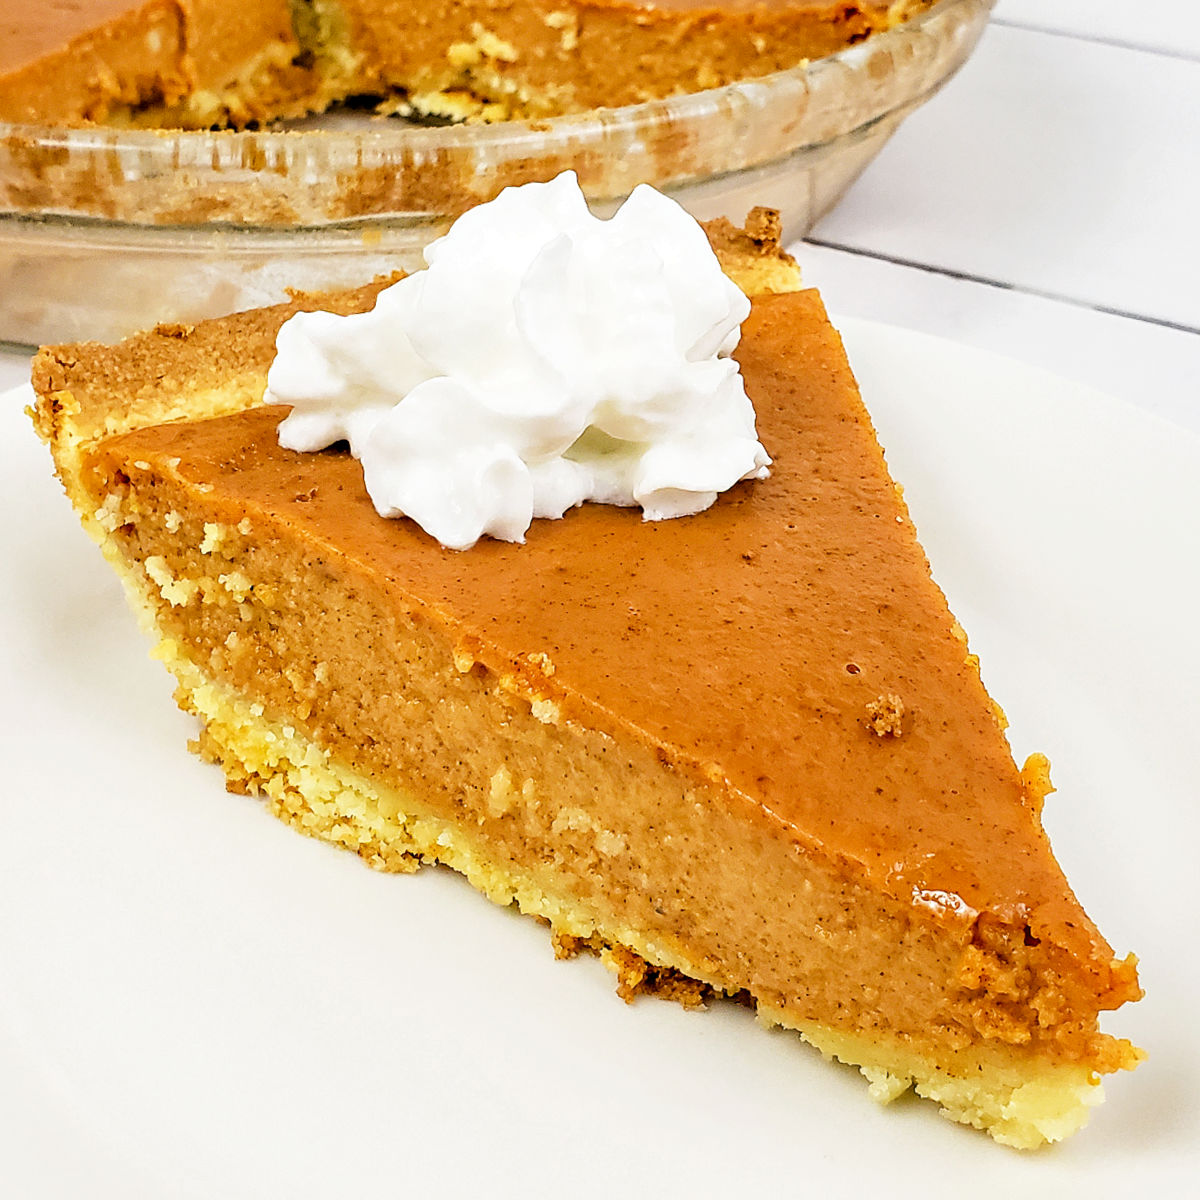 Slice of gluten free pumpkin pie served with whipped cream on top.